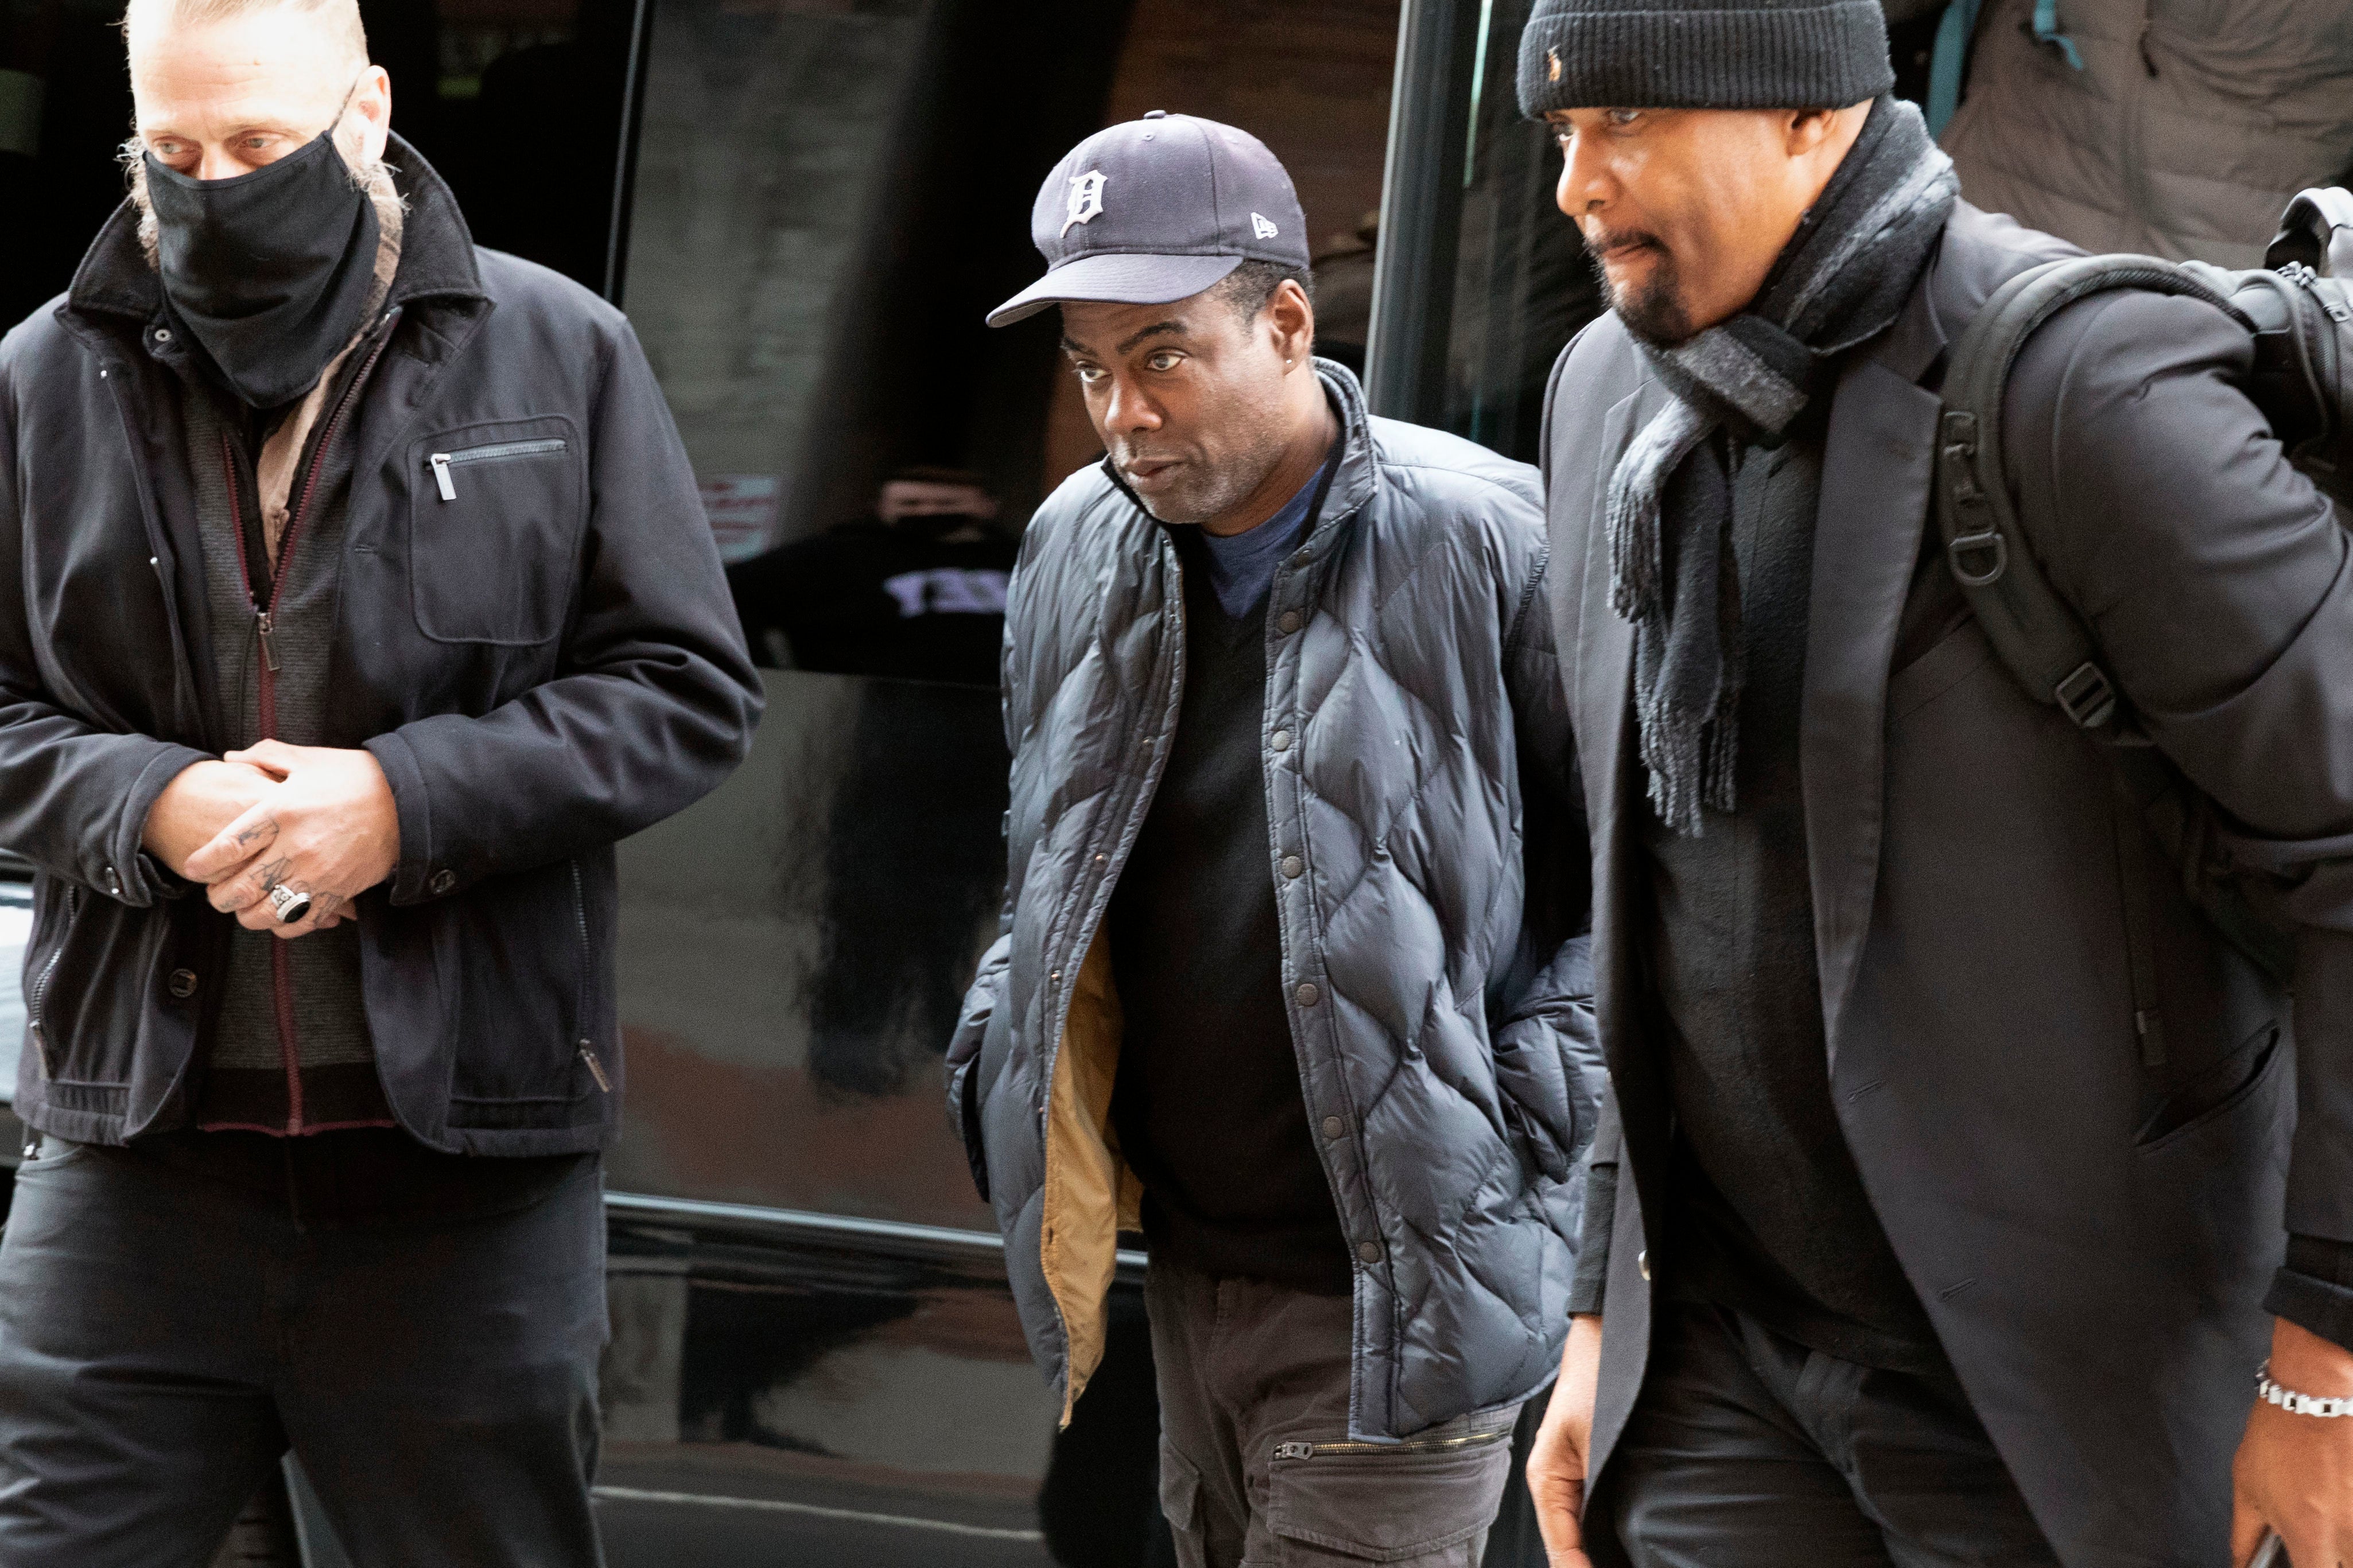 Chris Rock went on his comedy tour days after the Oscars